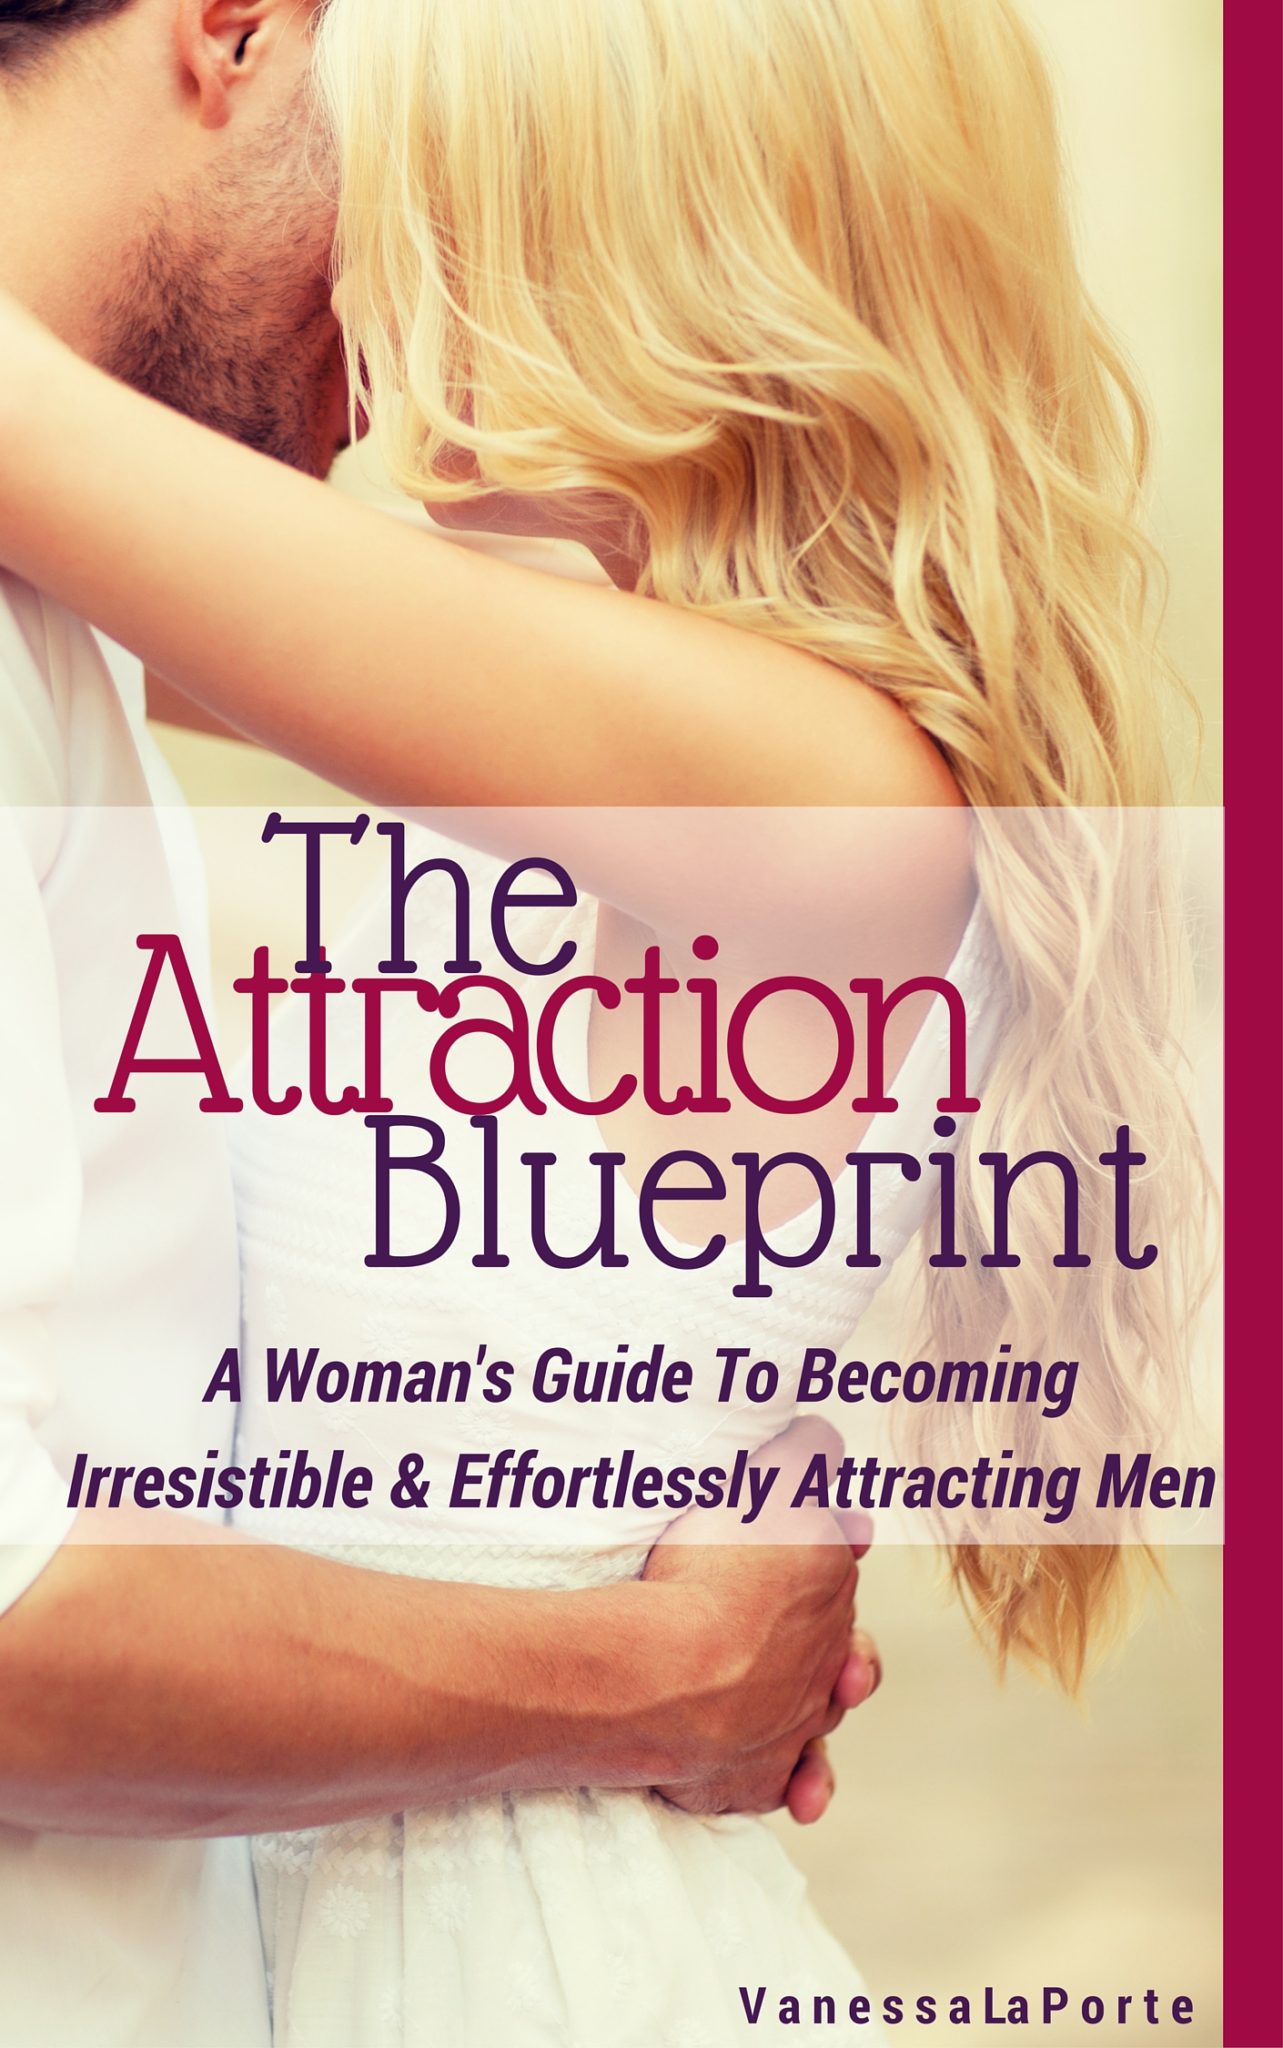 FREE: The Attraction Blueprint: A Woman’s Guide to Becoming Irresistible and Effortlessly Attracting Men by Vanessa La Porte